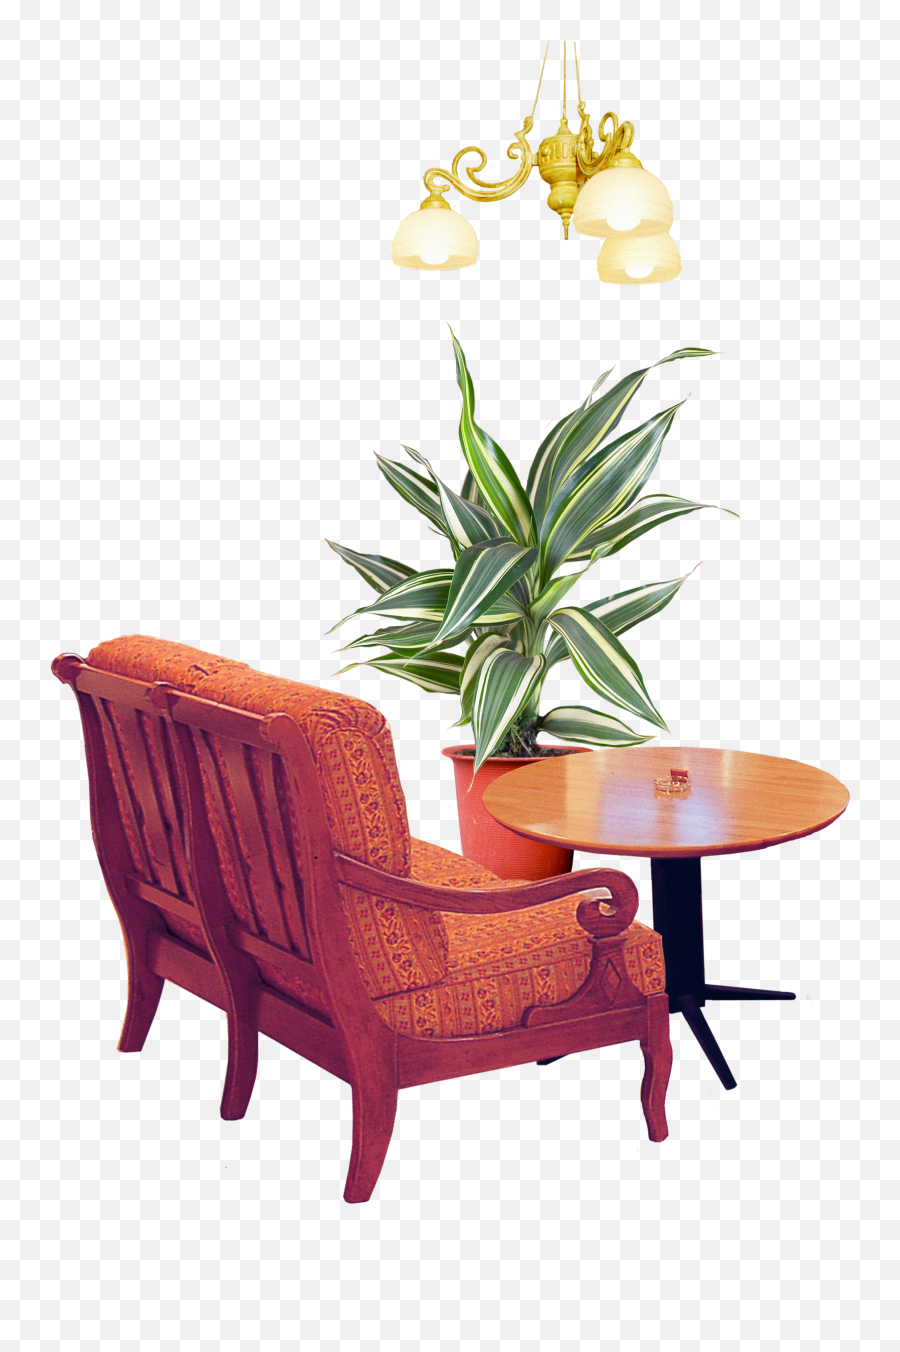 Outdoor Potted Plants Png - Png Transparent Interior Design Elements Png,Potted Plants Png